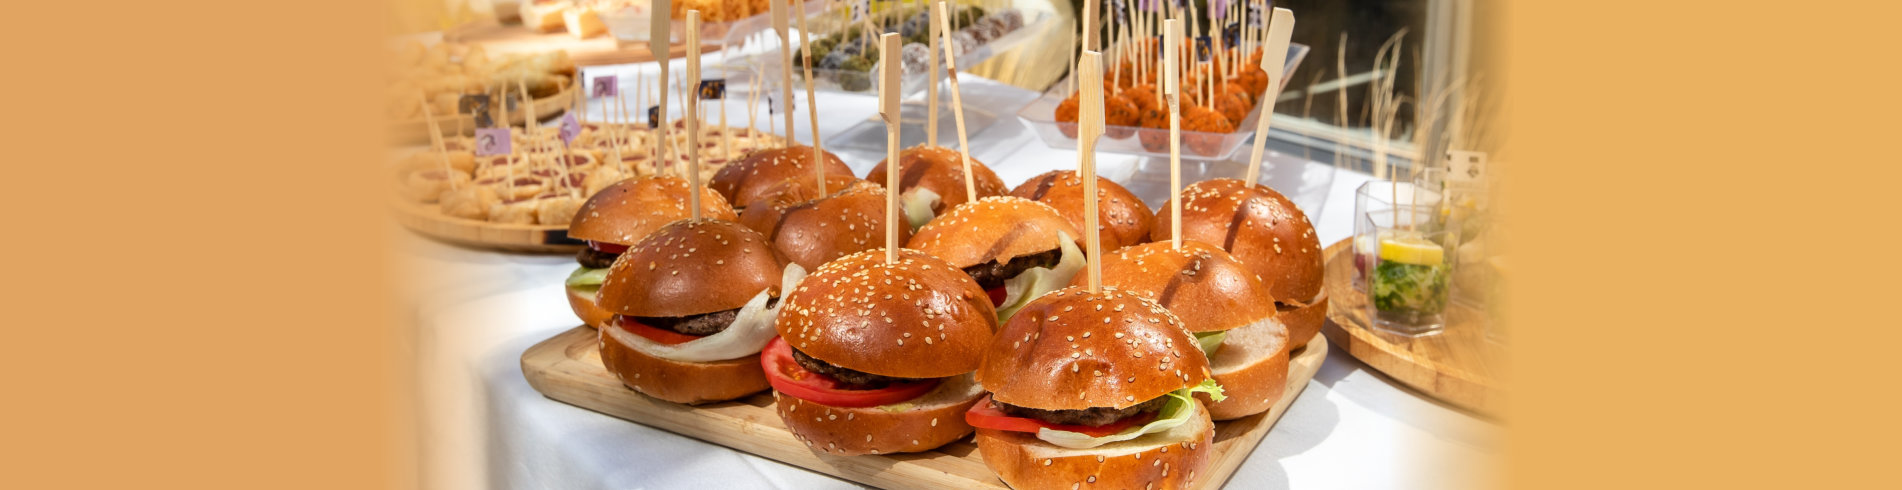 Burger and different food on a buffet table